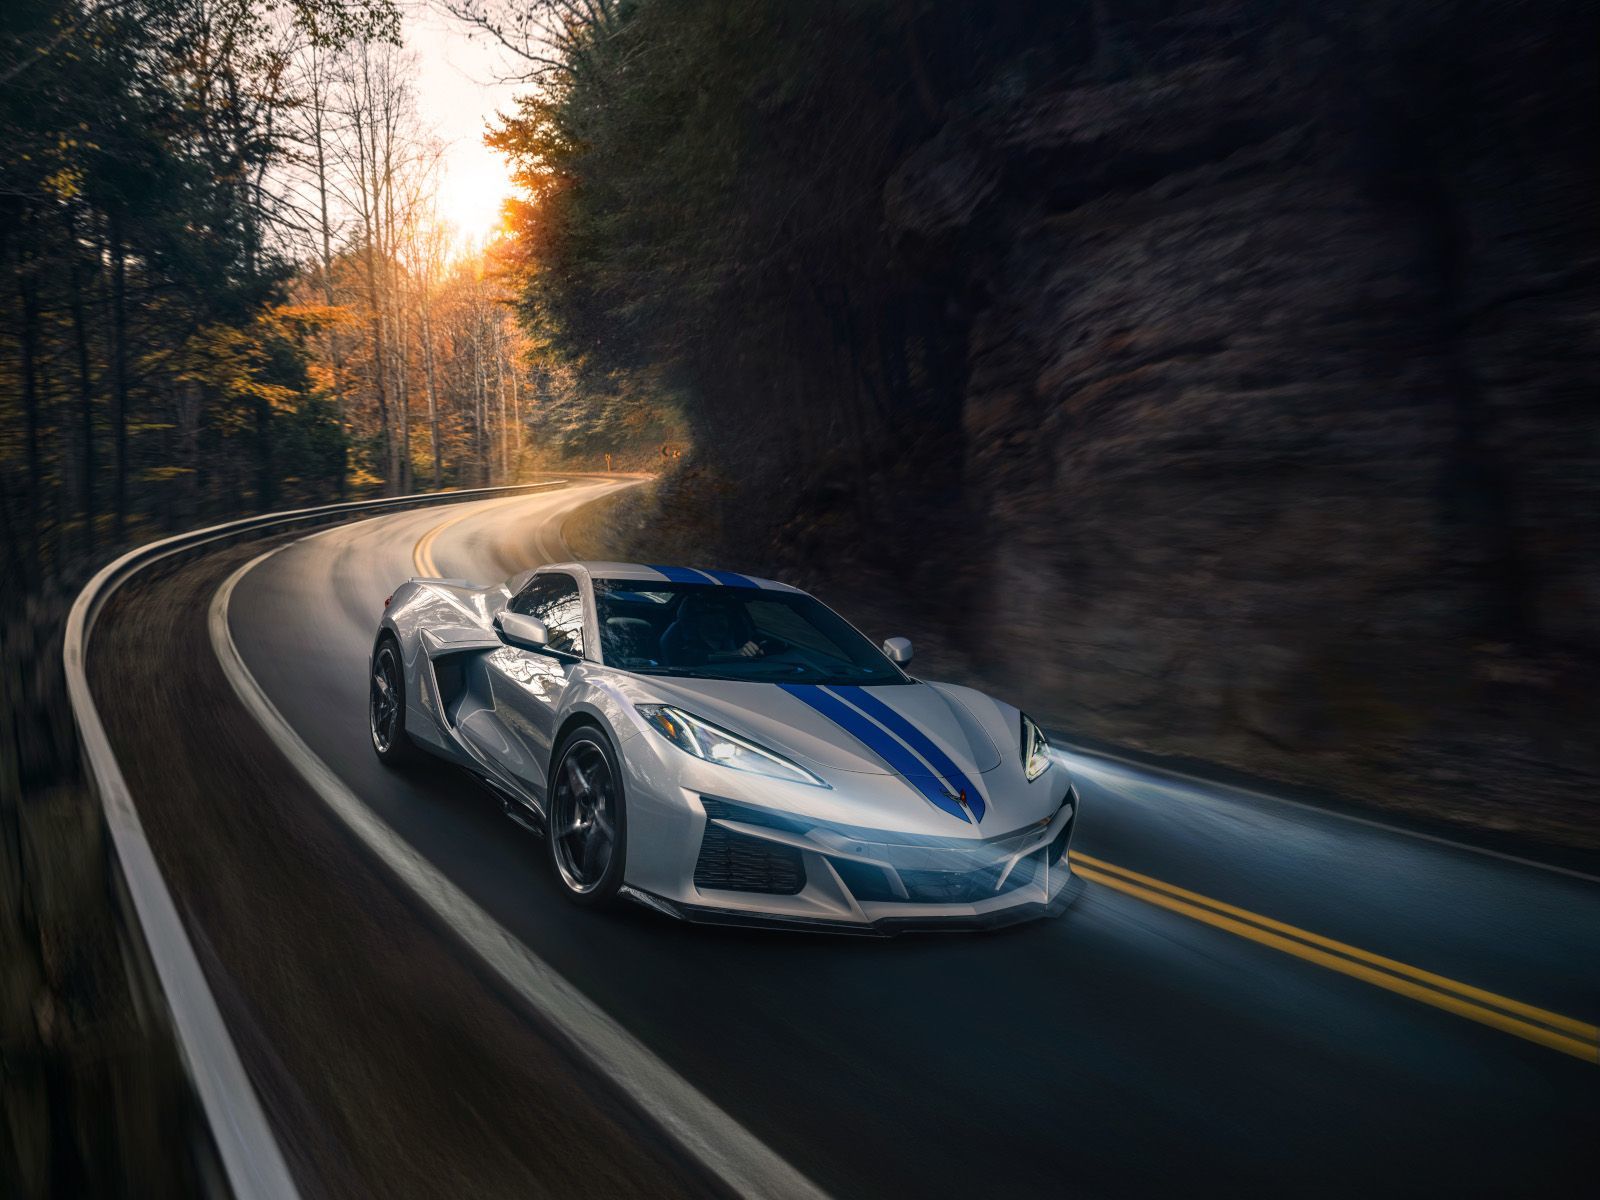 Chevrolet Corvette Stingray's V8 Engine Earns Recognition on Wards Auto 2023 Top 10 List